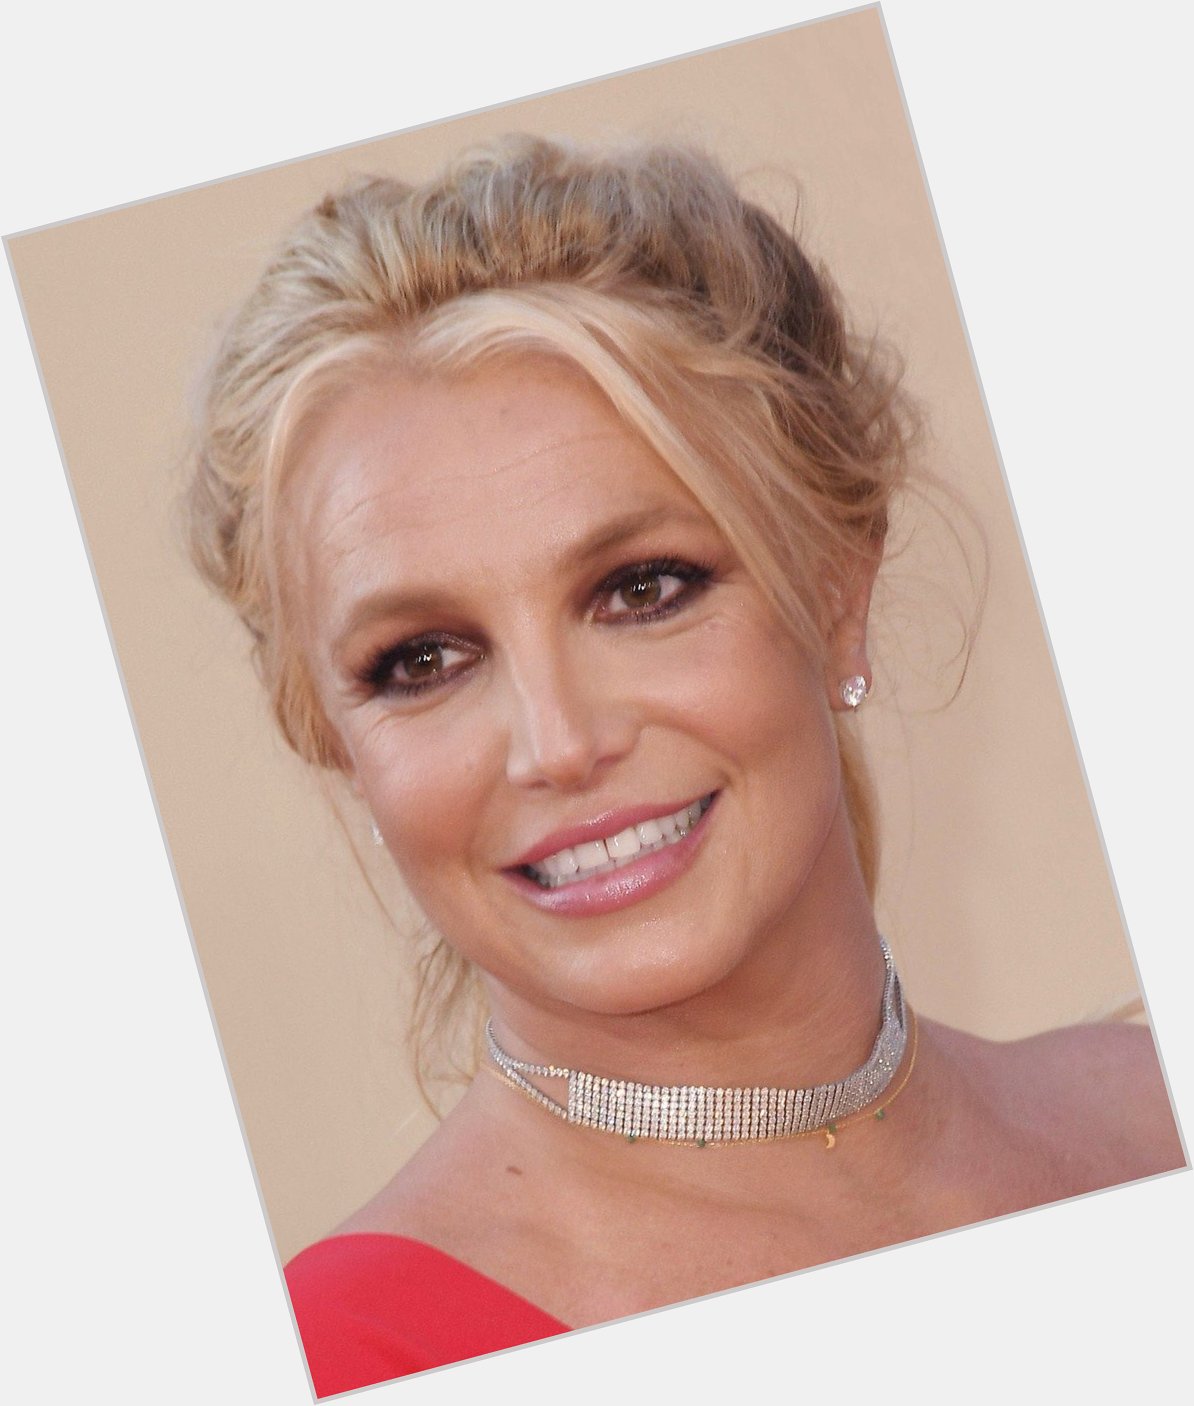 Happy Birthday to singer, songwriter, dancer and actress Britney Spears born on December 2, 1981 